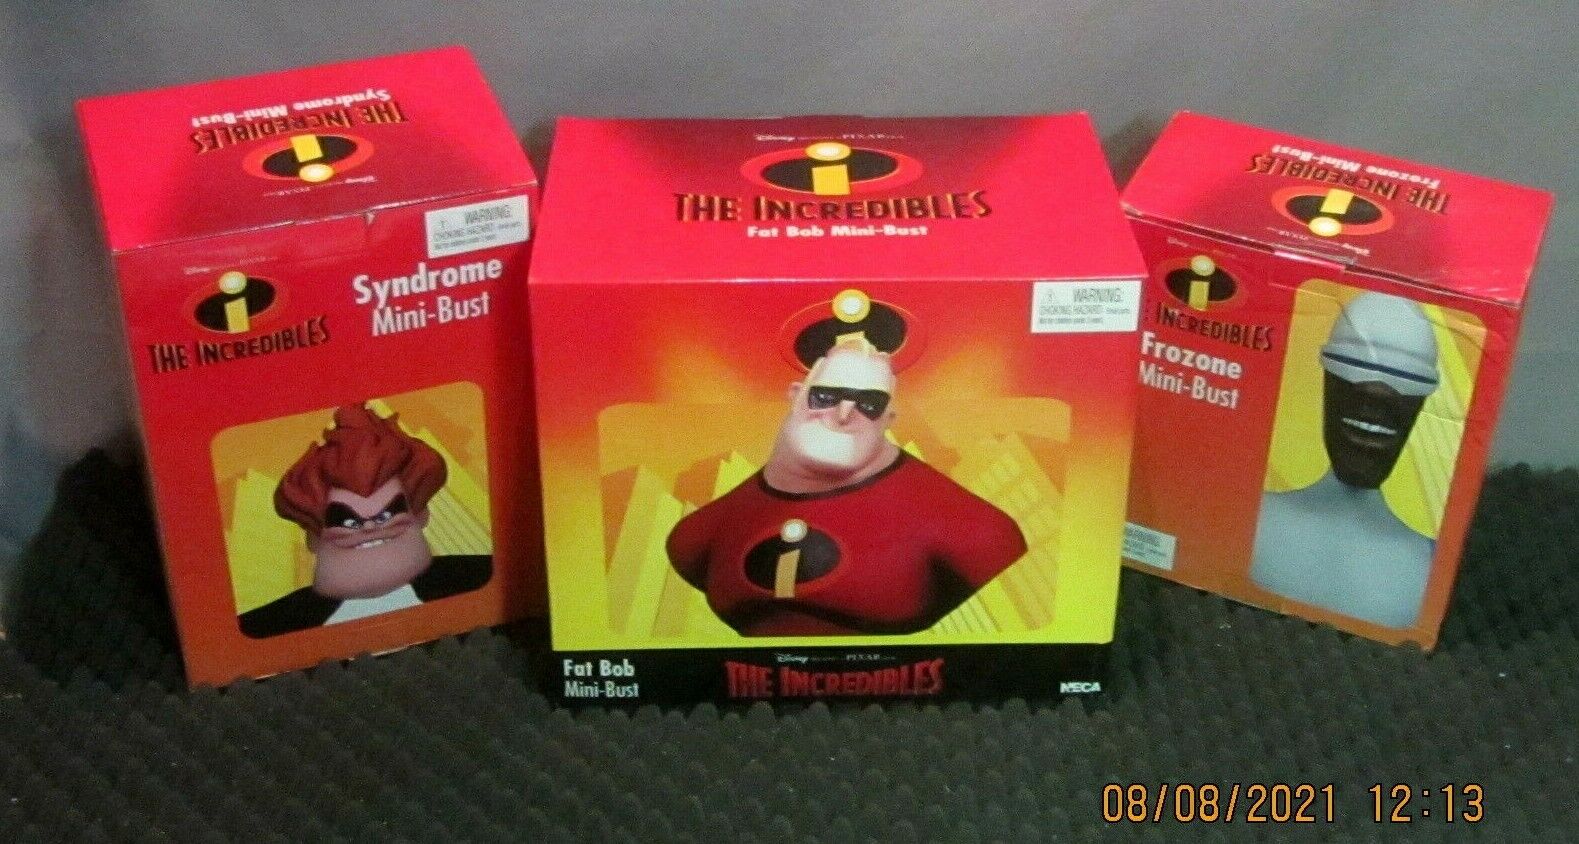 THE INCREDIBLES   COMPLETE 3 PC. SET LARGE SCALE BUST SET NEW  US SELLER RARE